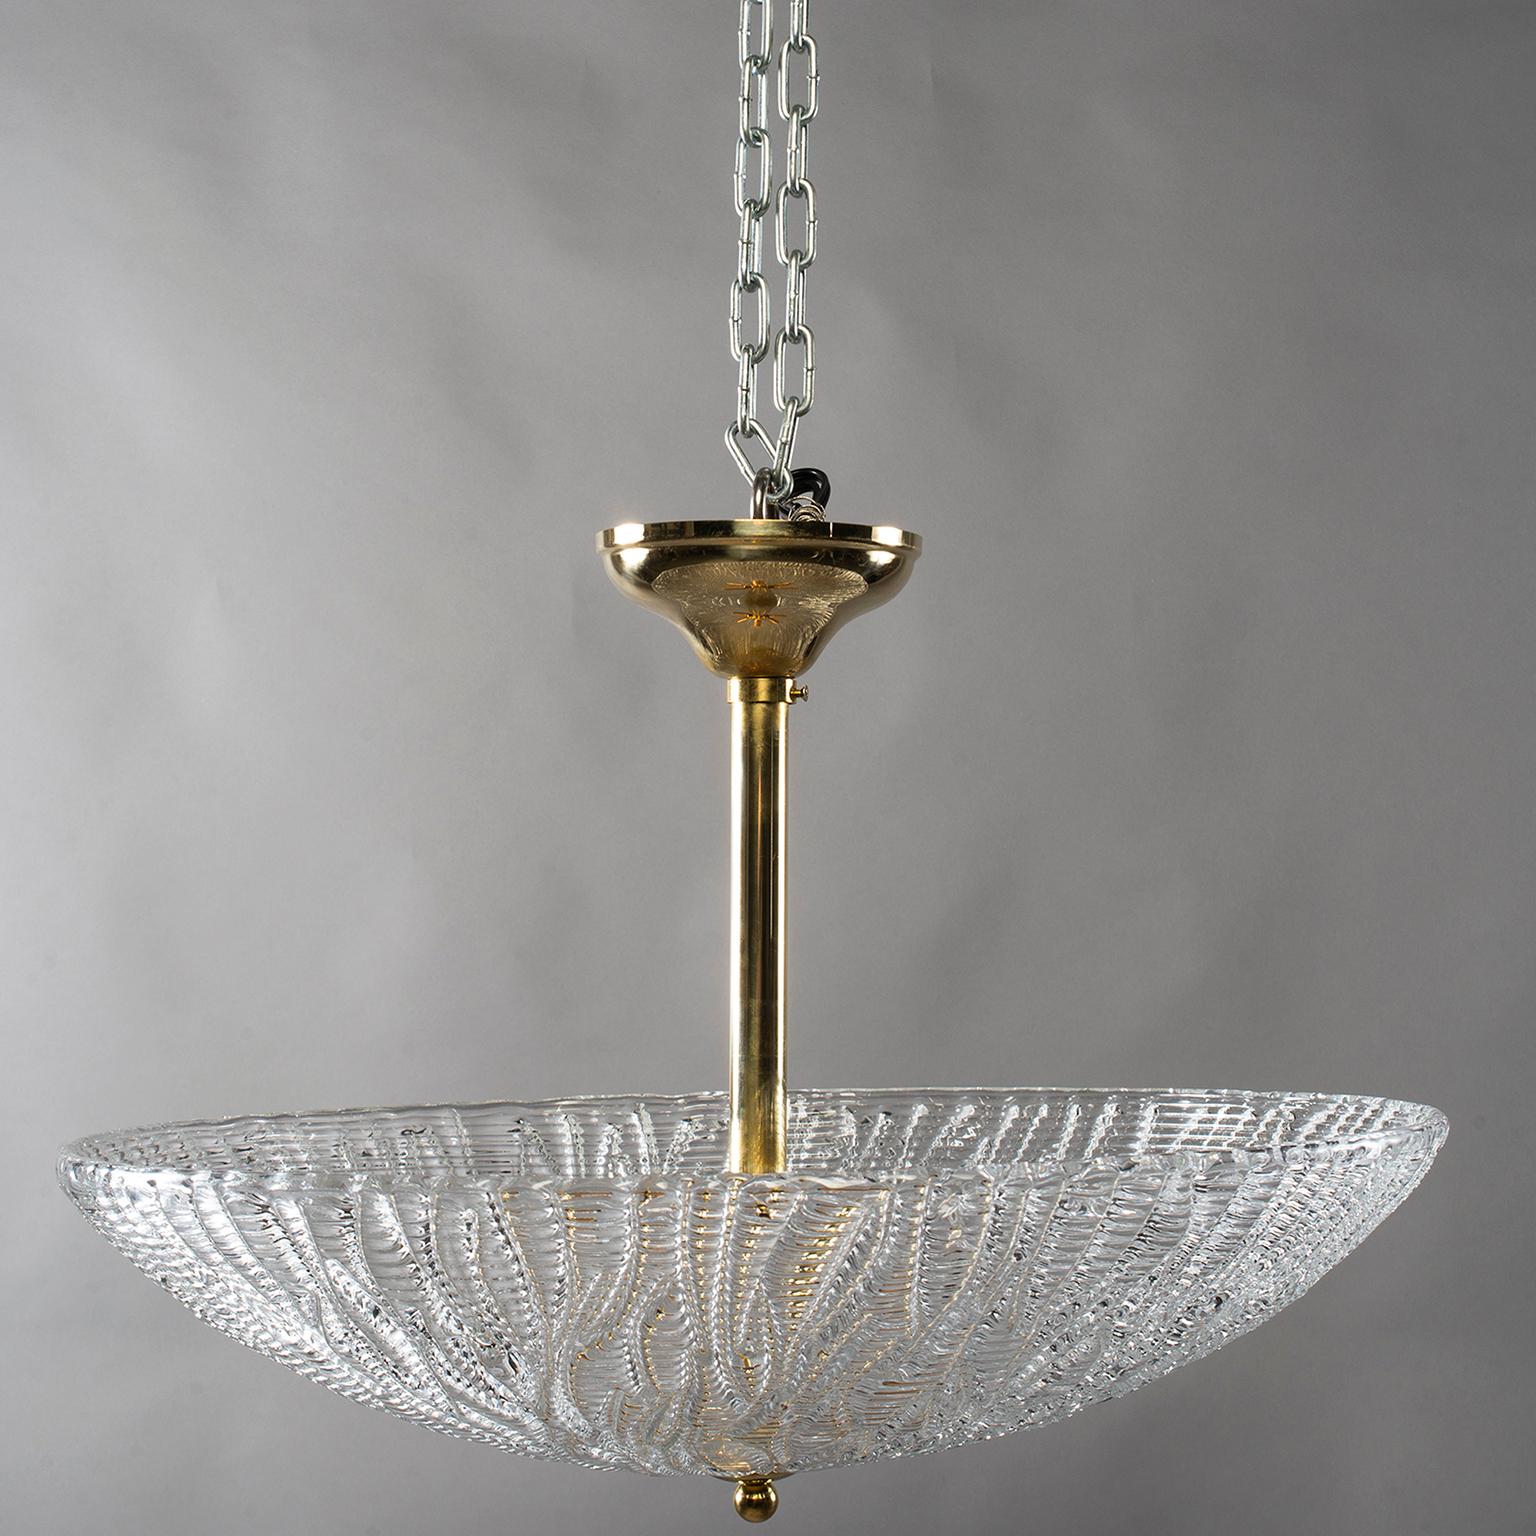 Mid-Century Modern Barovier and Toso Umbrella Form Fixture with Brass Fittings